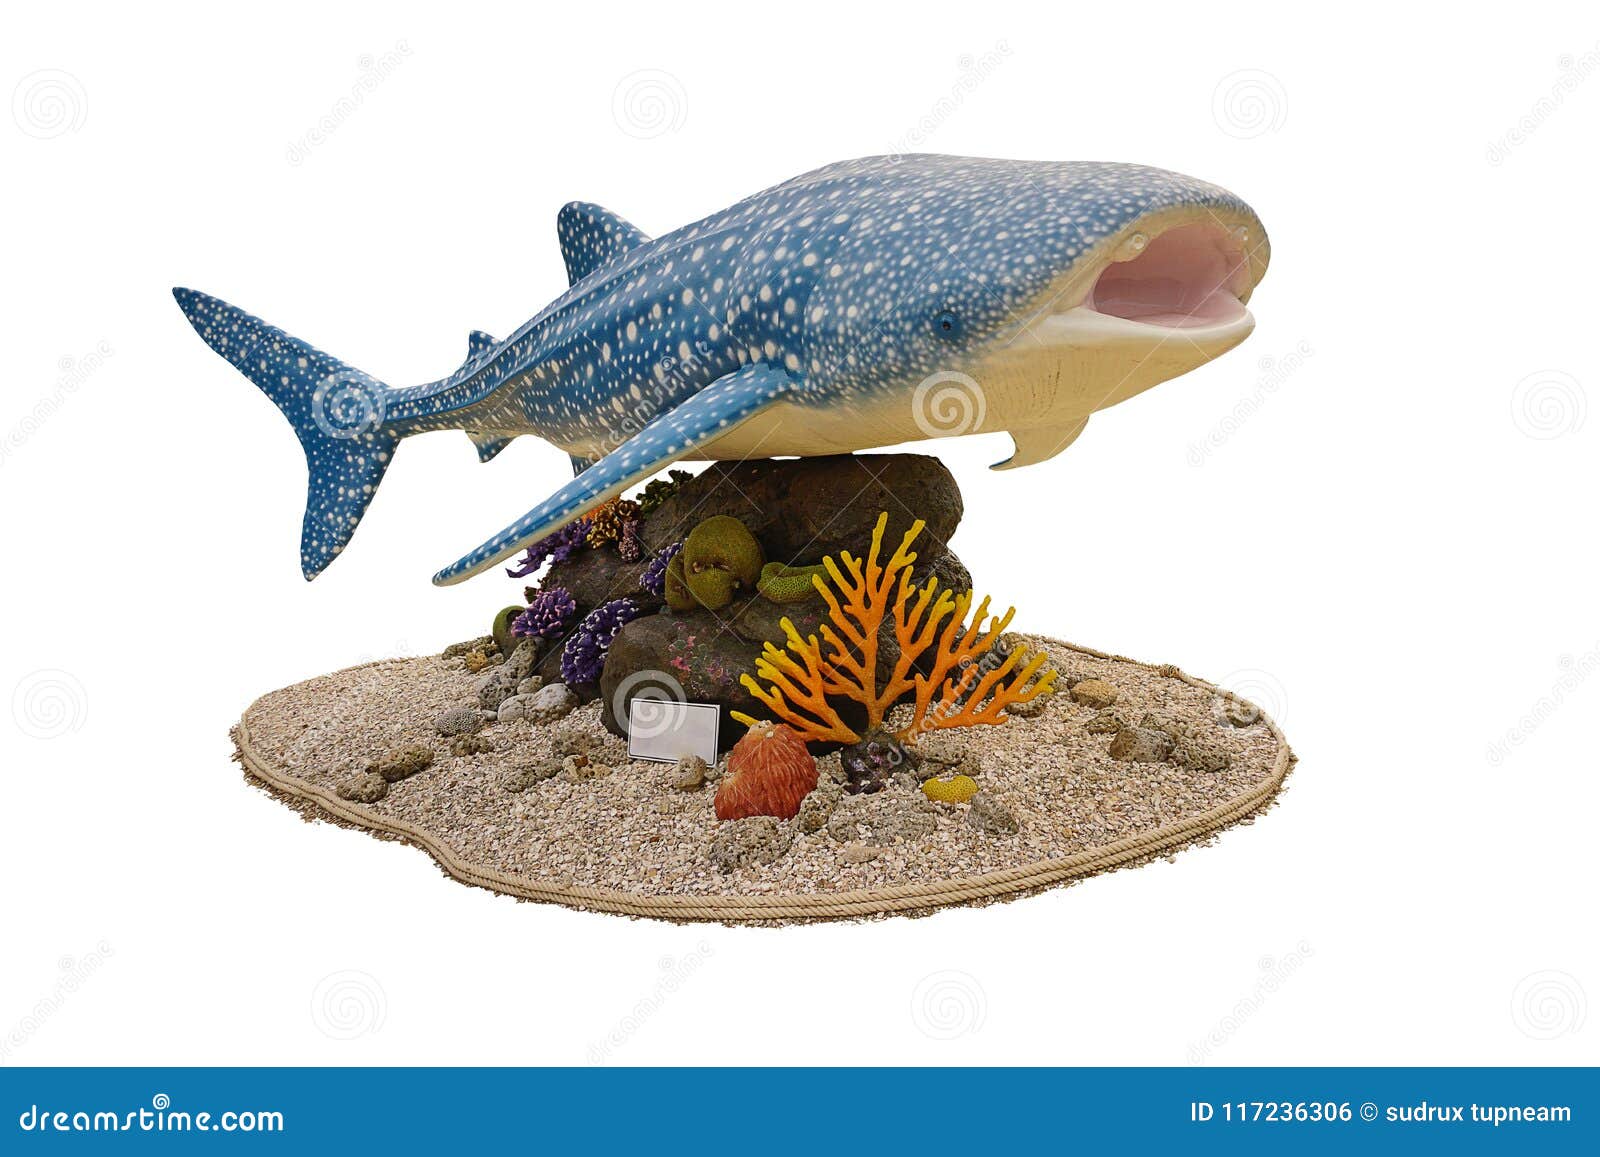 whale shark statue for campaign about catching fishwith clipping path